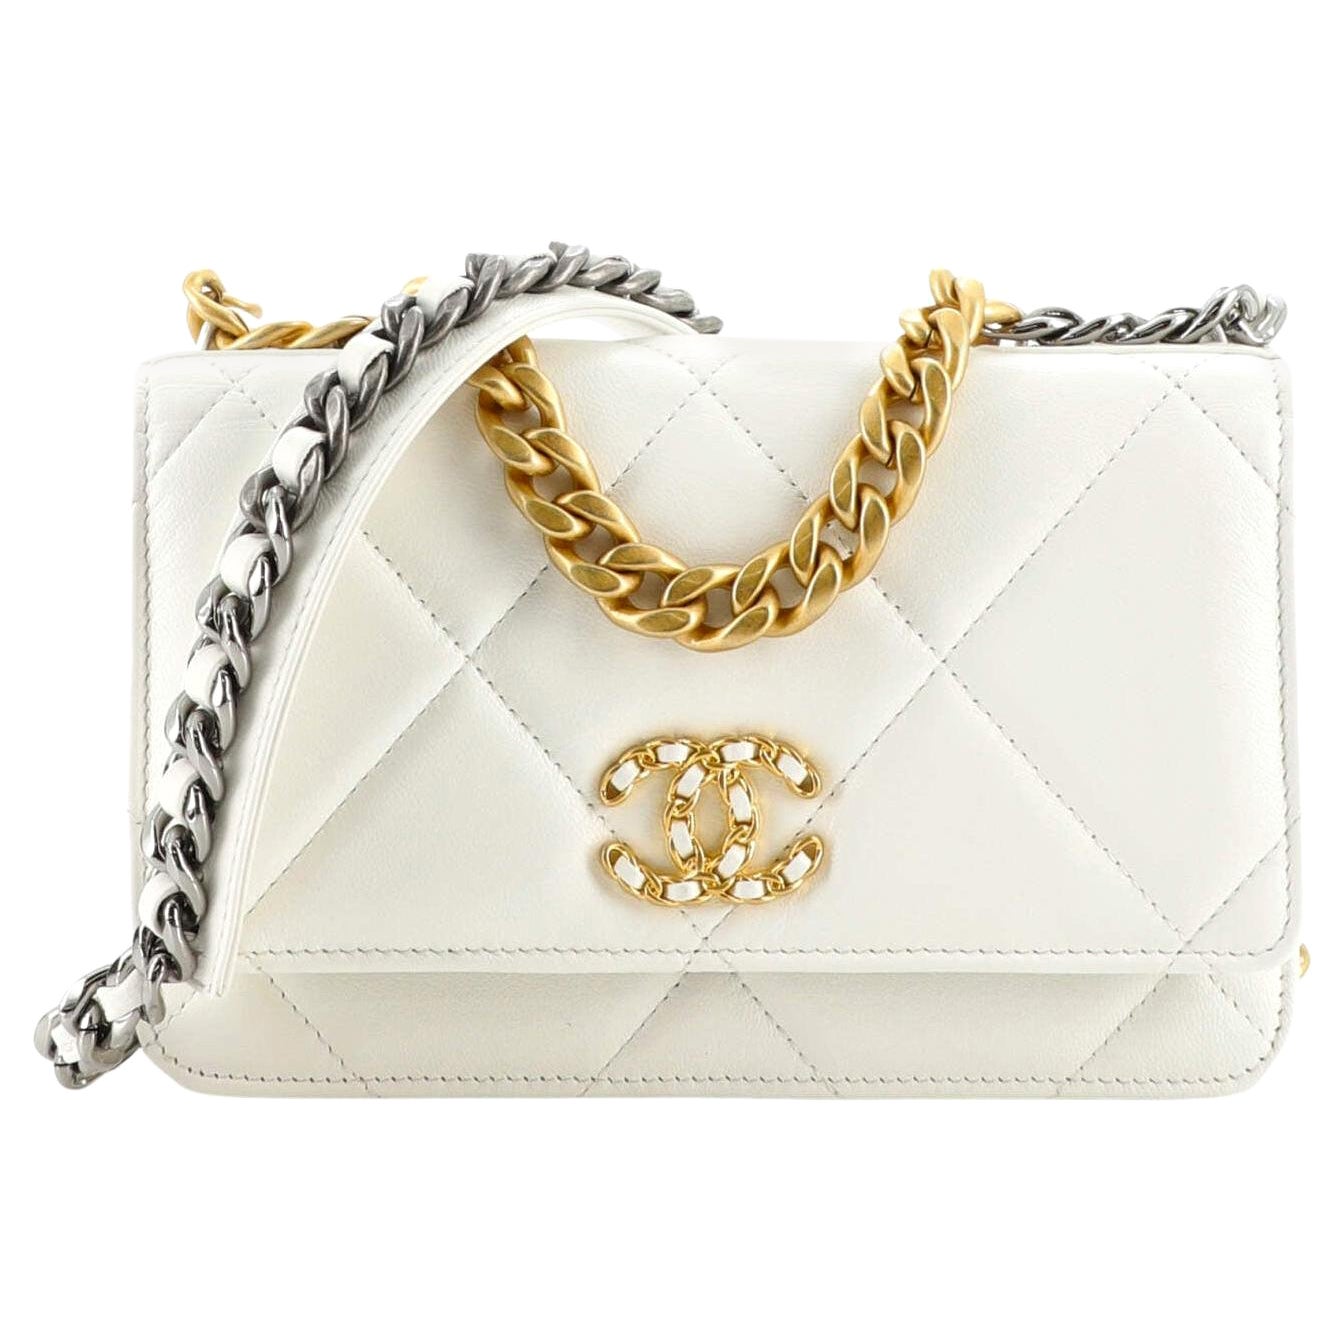 CHANEL Lambskin Quilted CC Pearl Crush Wallet on Chain WOC Grey 822843